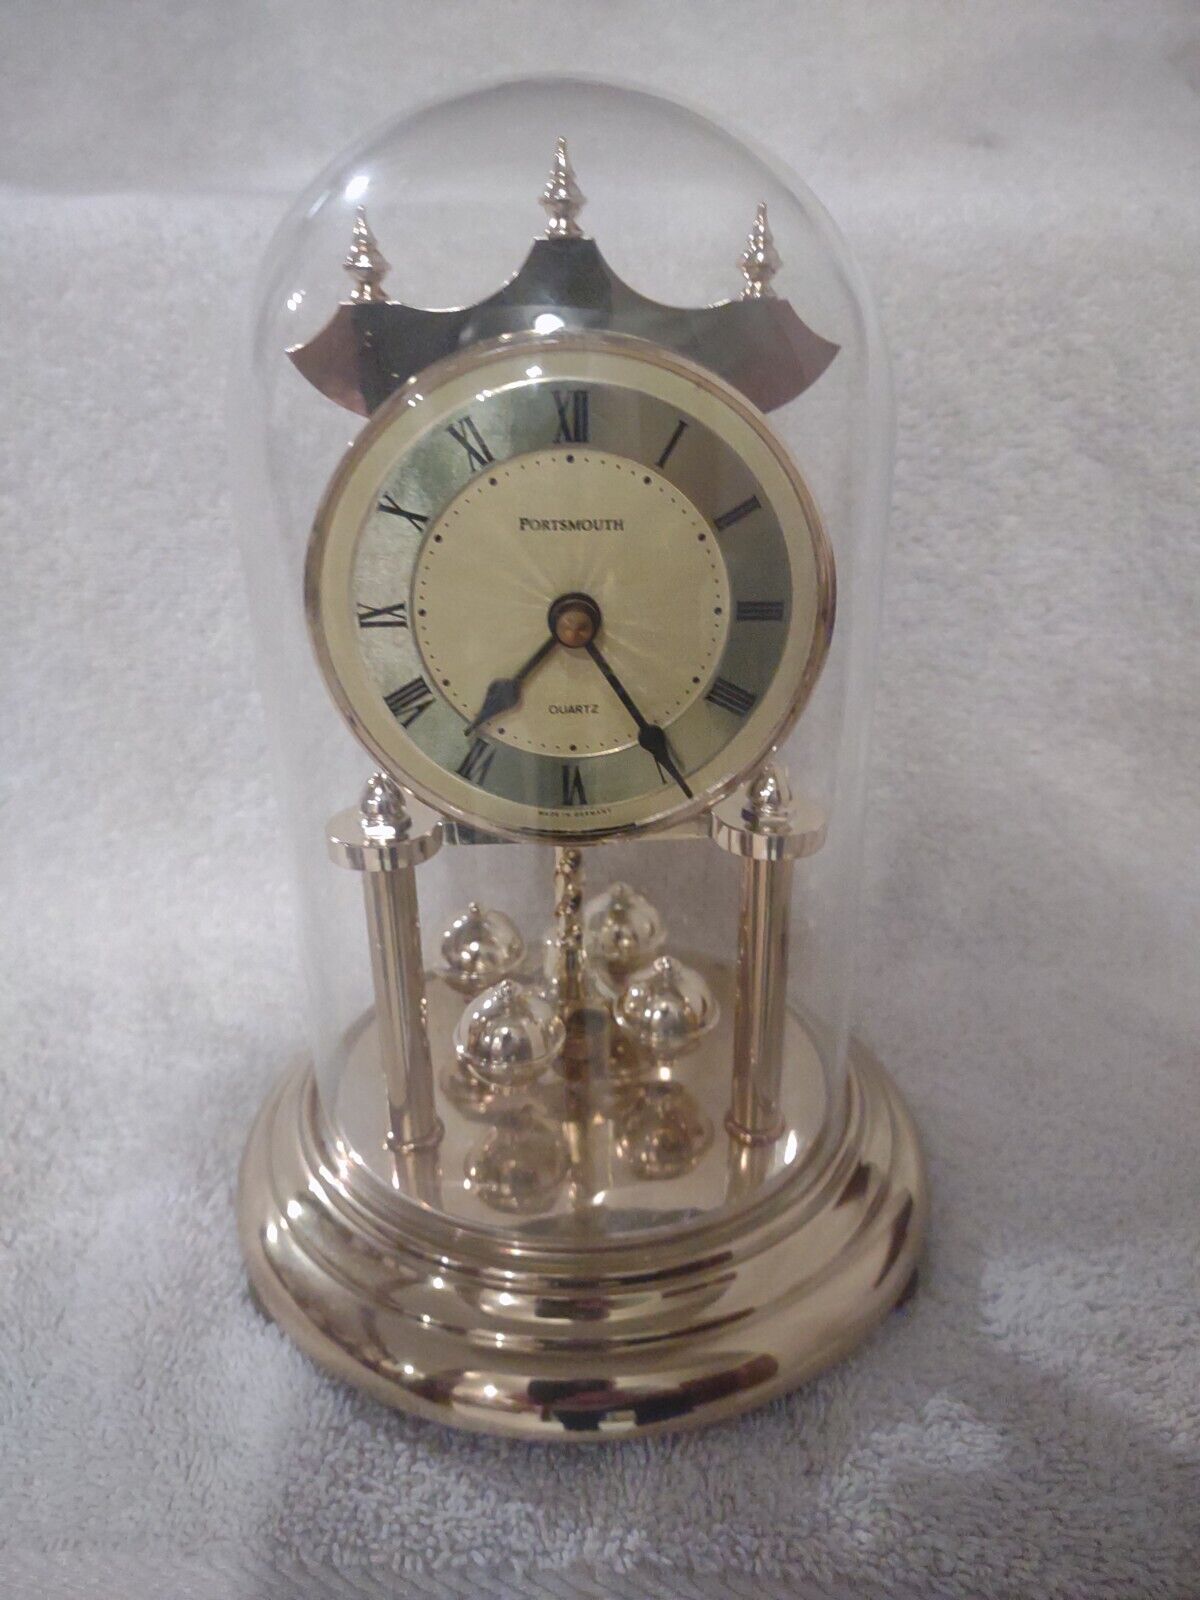 Portsmouth Quartz Anniversary Clock Made In Germany-In Working/Running Condition